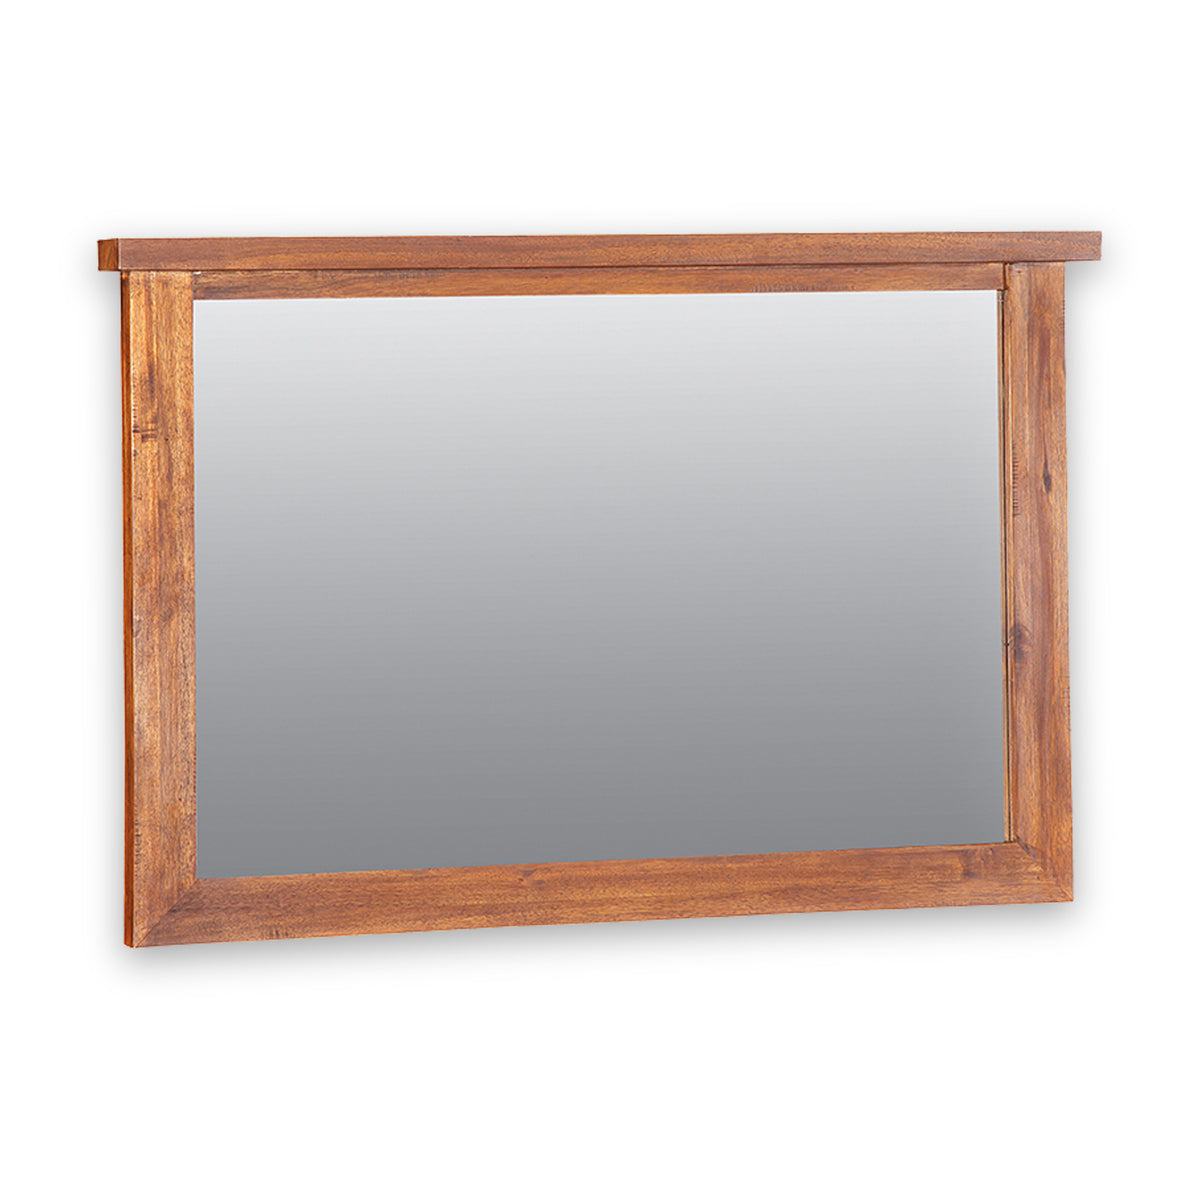 Ladock Acacia Frame Mirror from Roseland Furniture